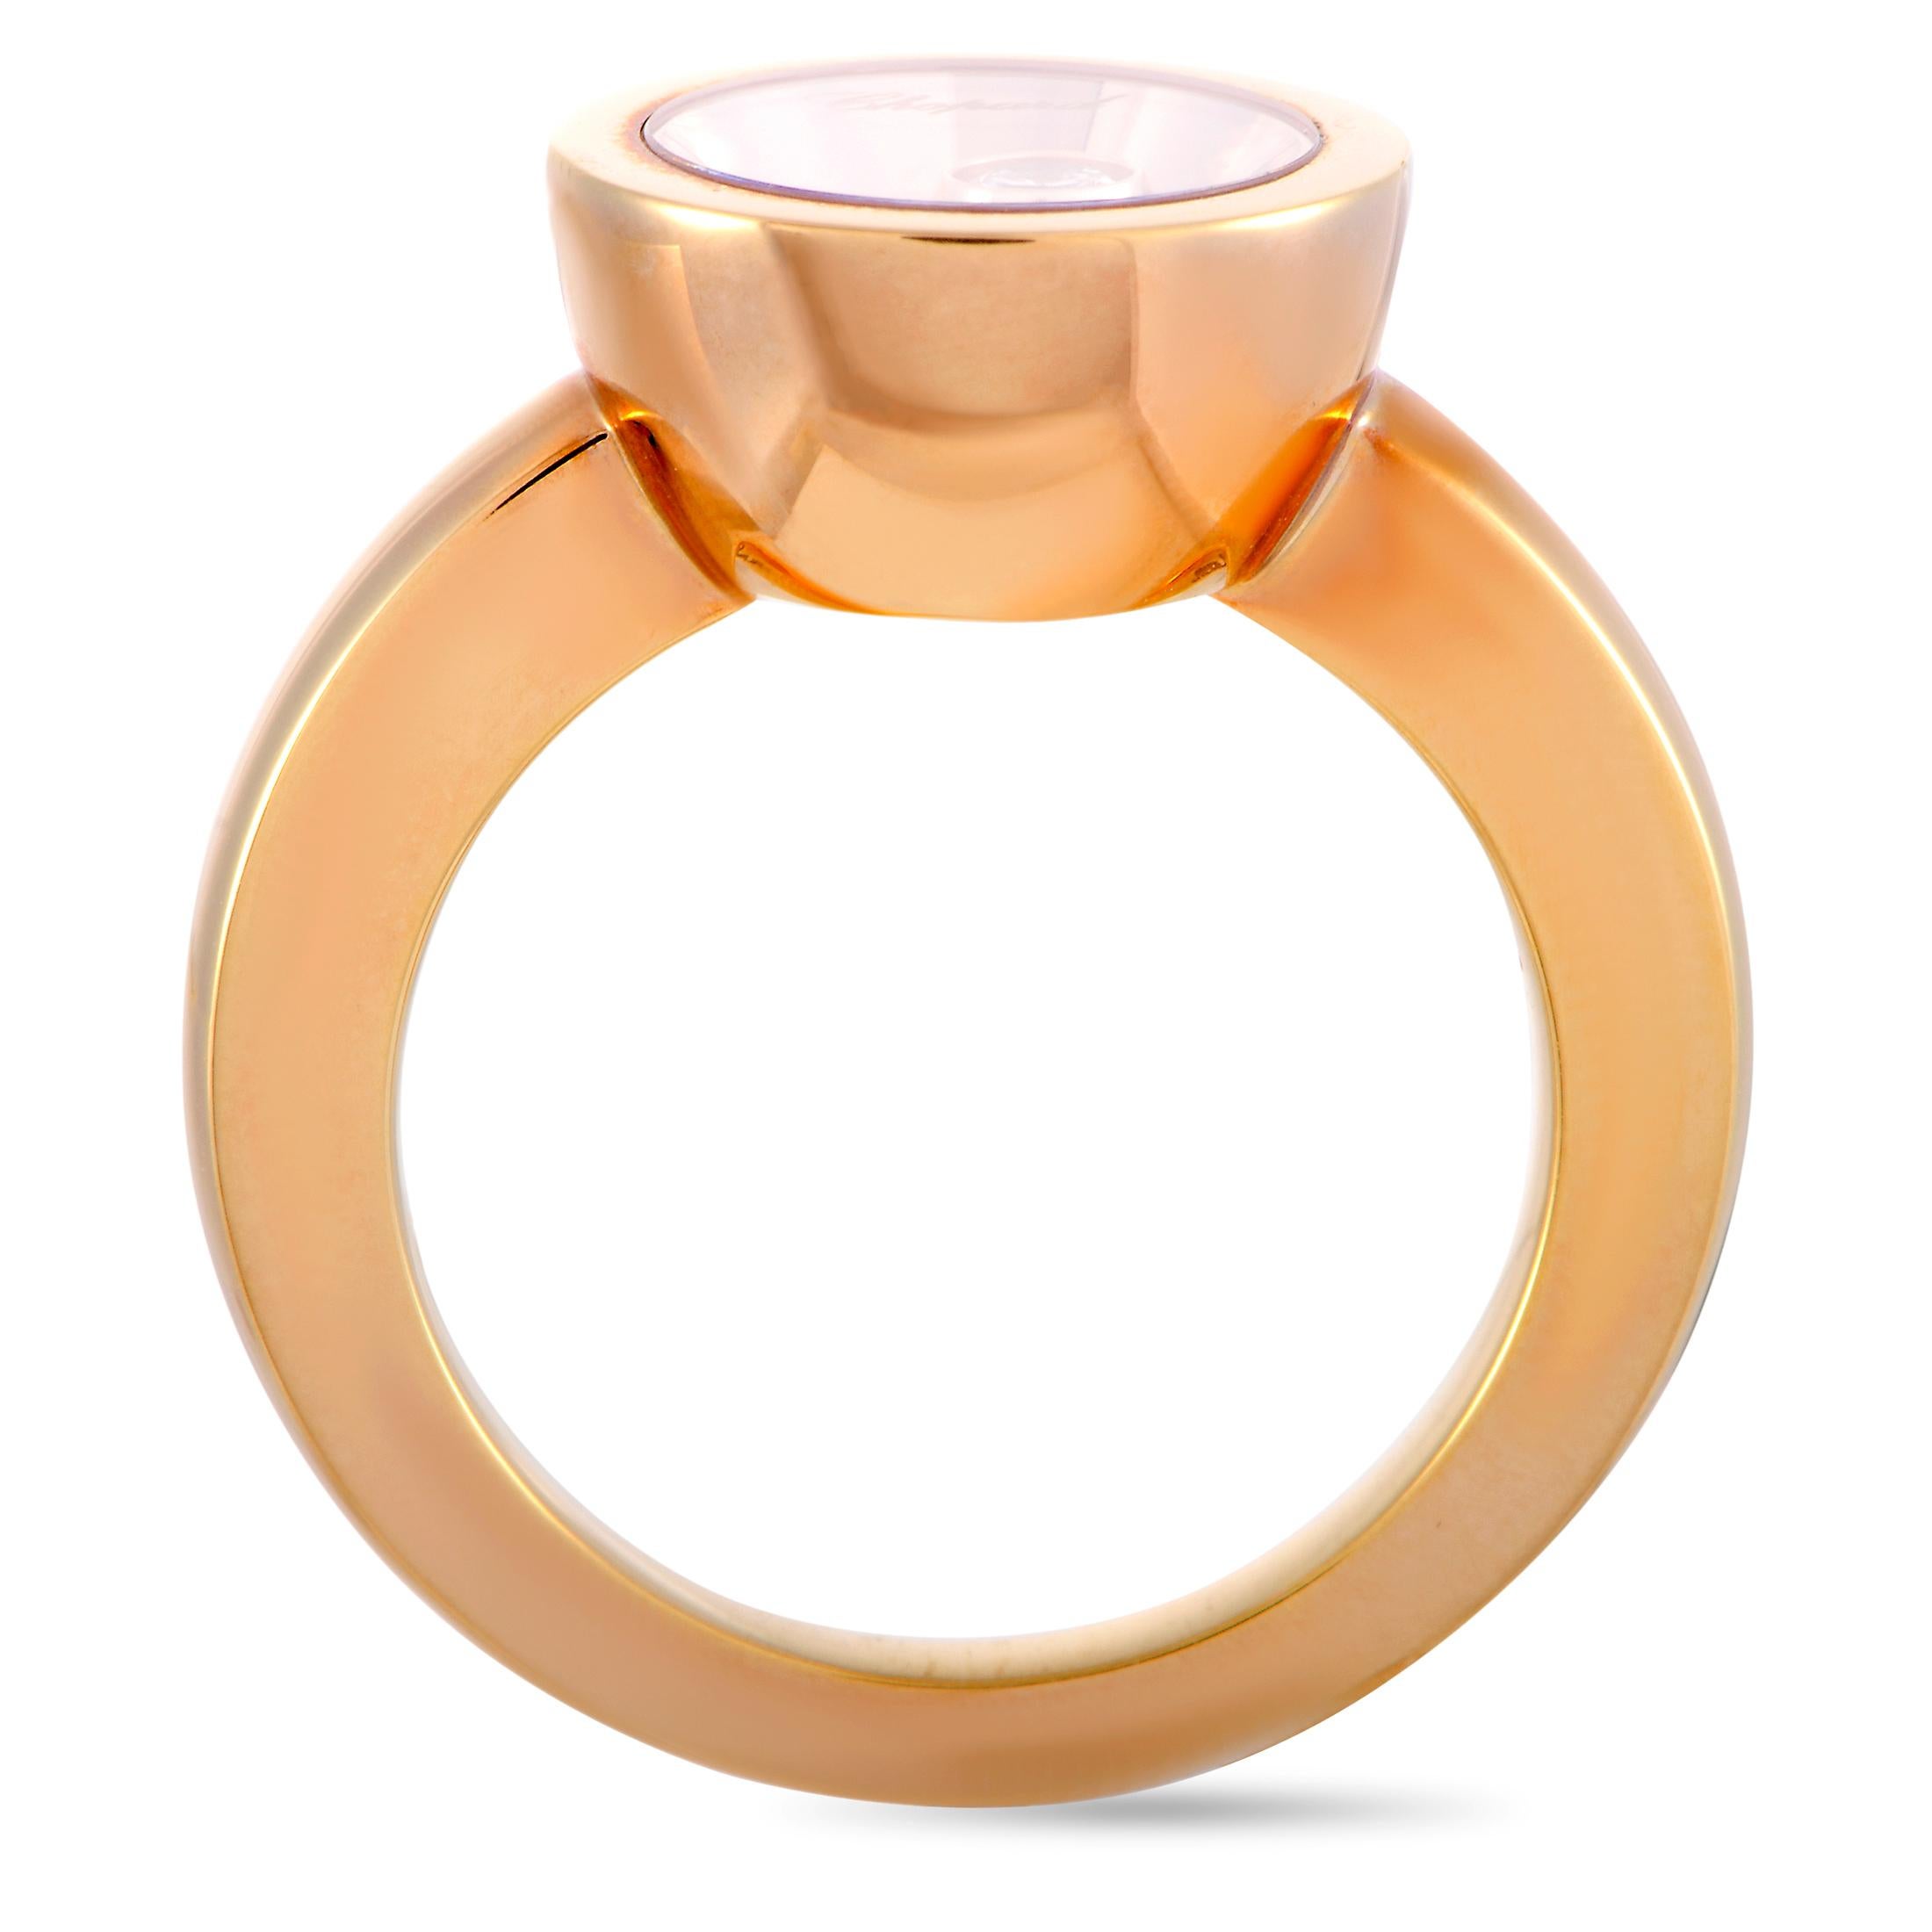 The Chopard “Happy Diamonds” ring is crafted from 18K rose gold and features a 0.10 ct floating diamond stone.  The ring weighs 13.1 grams, boasting band thickness of 2 mm and top height of 6 mm, while top dimensions measure 12 by 12 mm.

This item